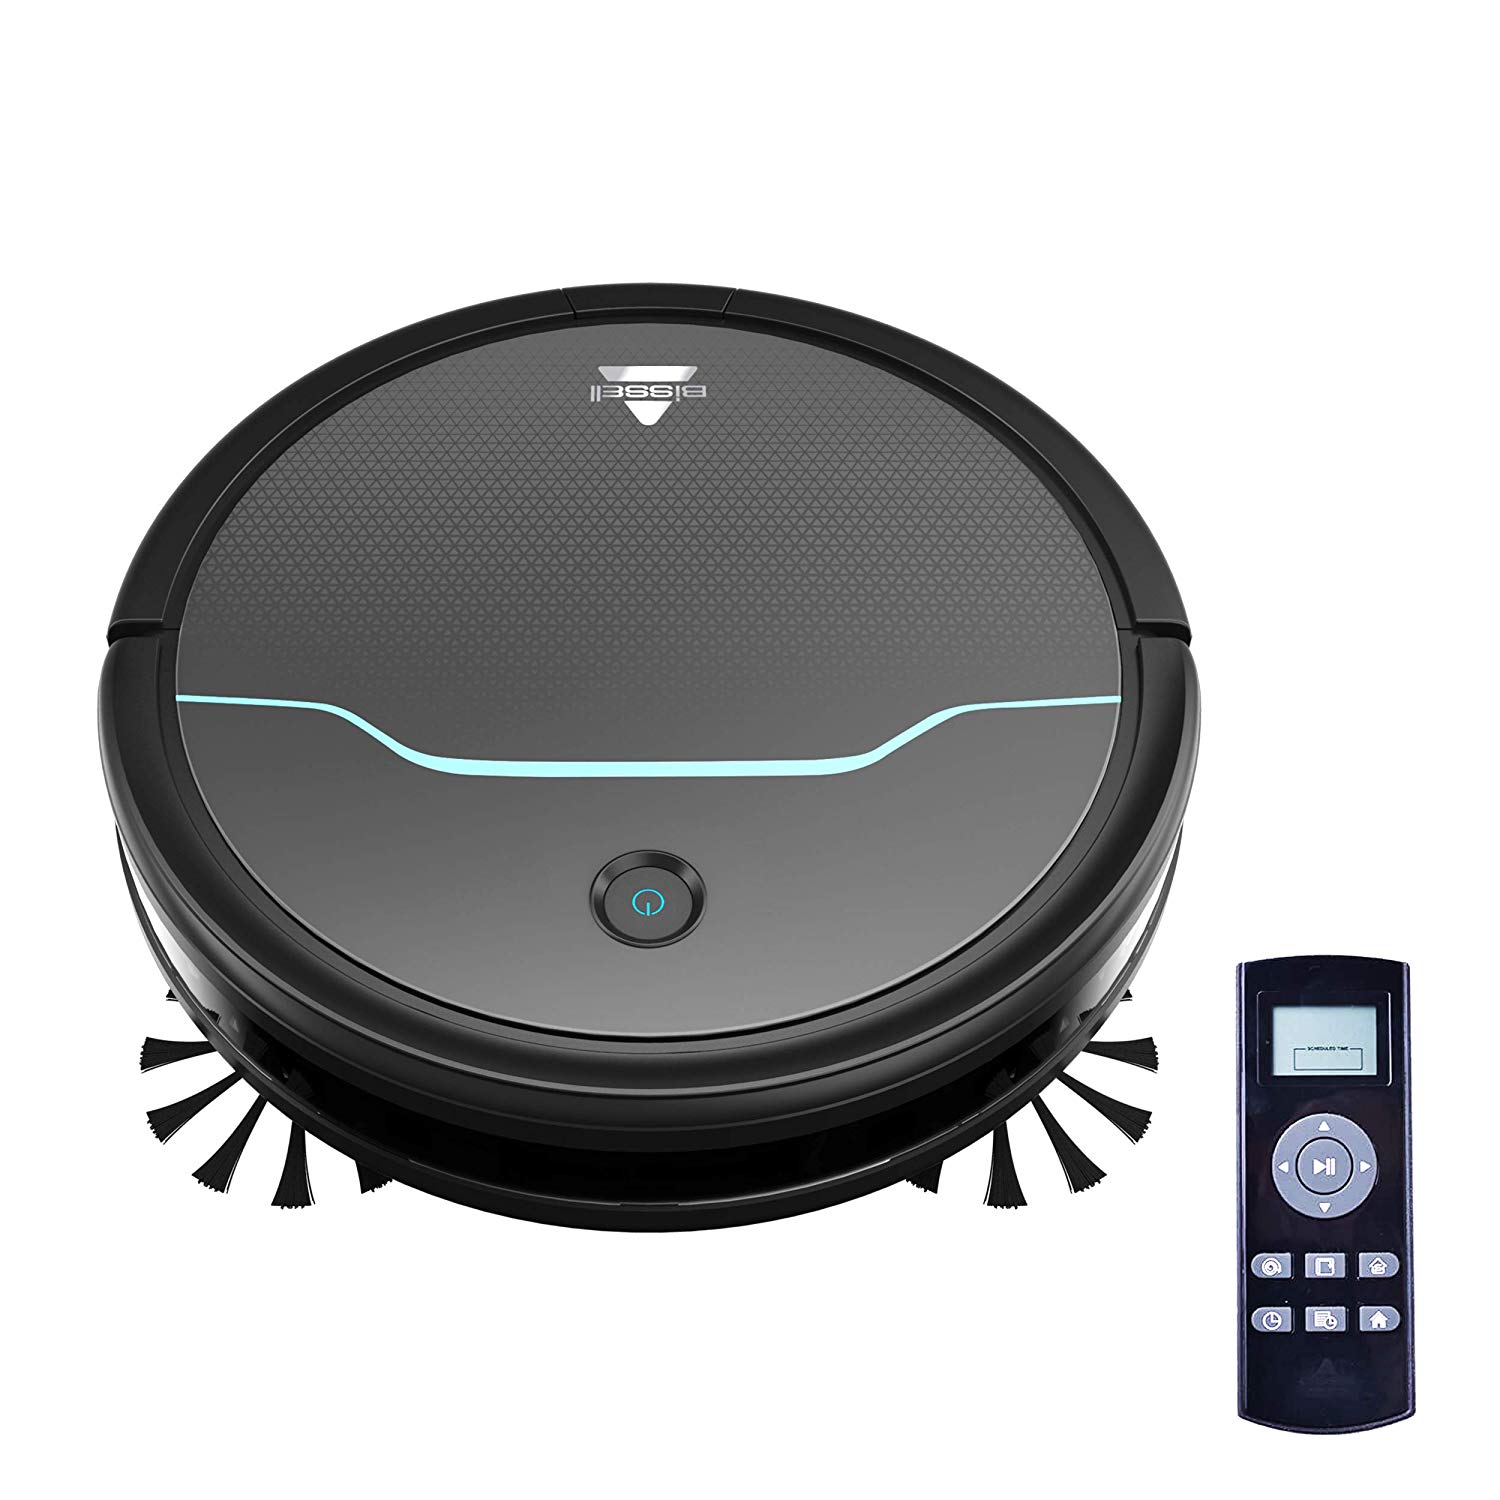 BISSELL EV675 Robot Vacuum Cleaner for Pet Hair with Self